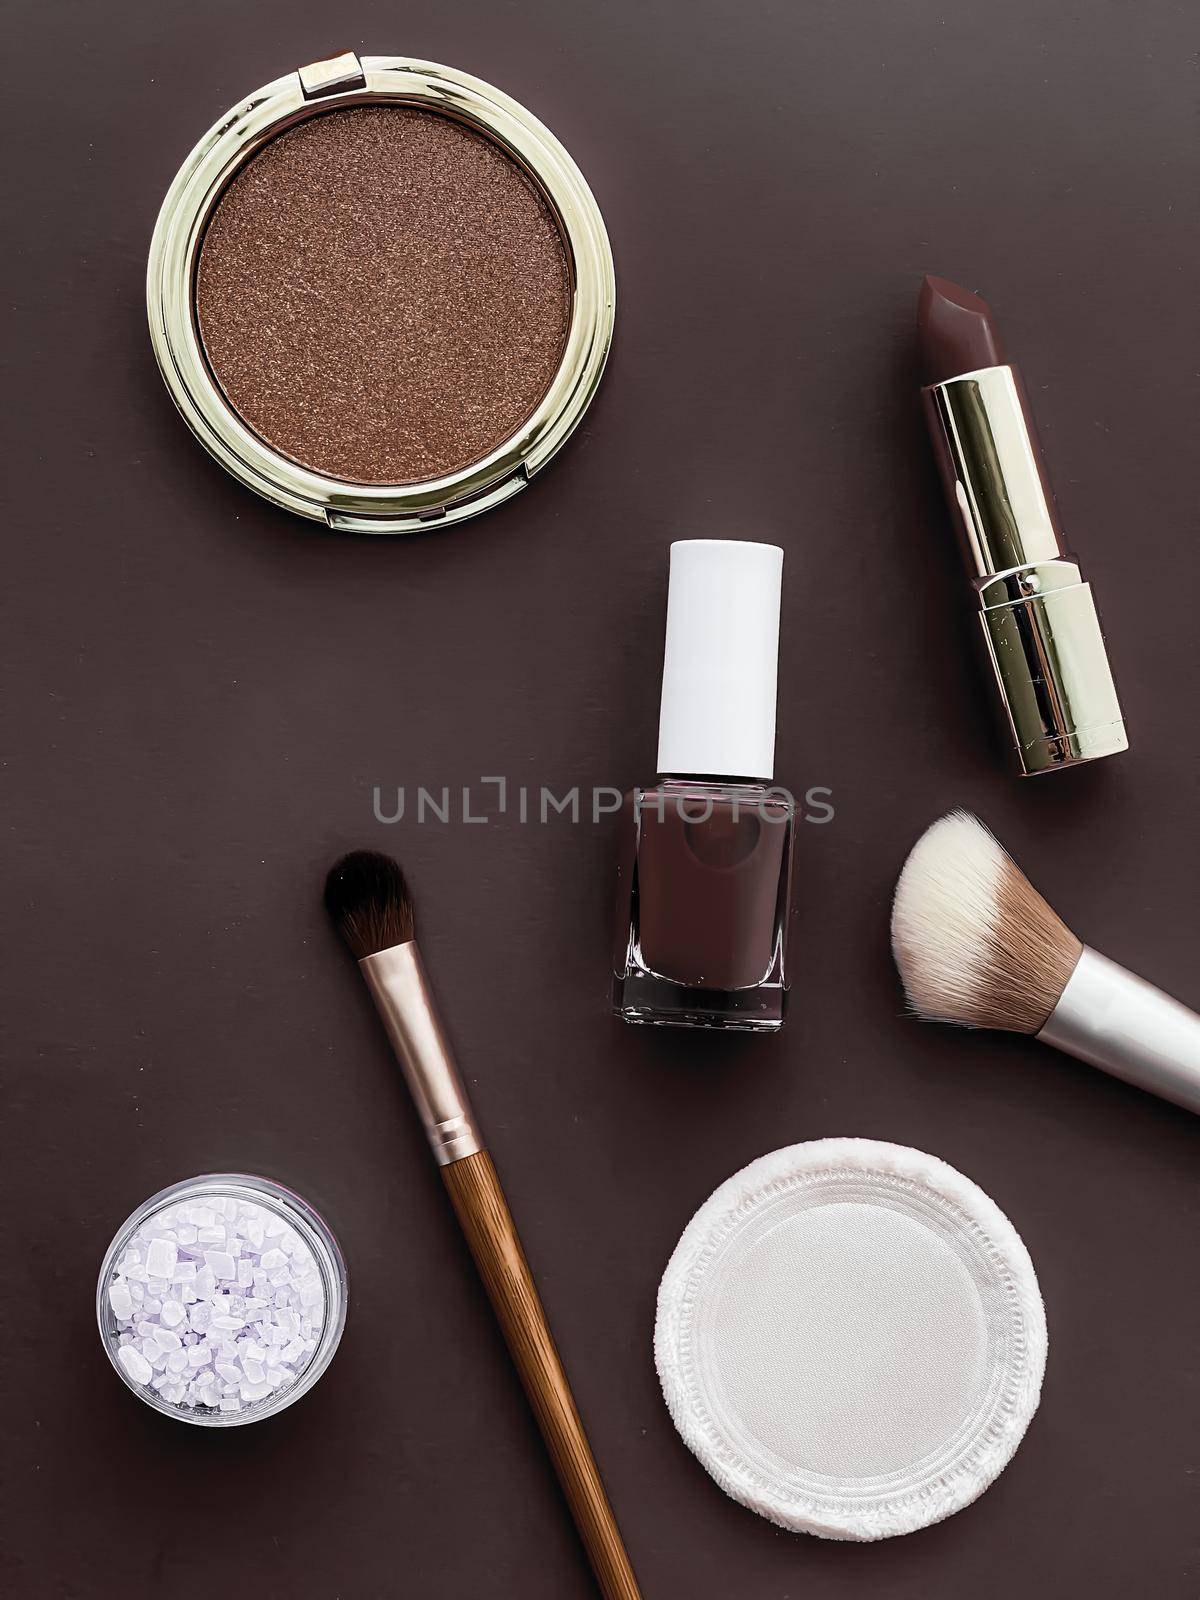 Beauty, make-up and cosmetics flatlay design with copyspace, cosmetic products and makeup tools on brown background, girly and feminine style by Anneleven